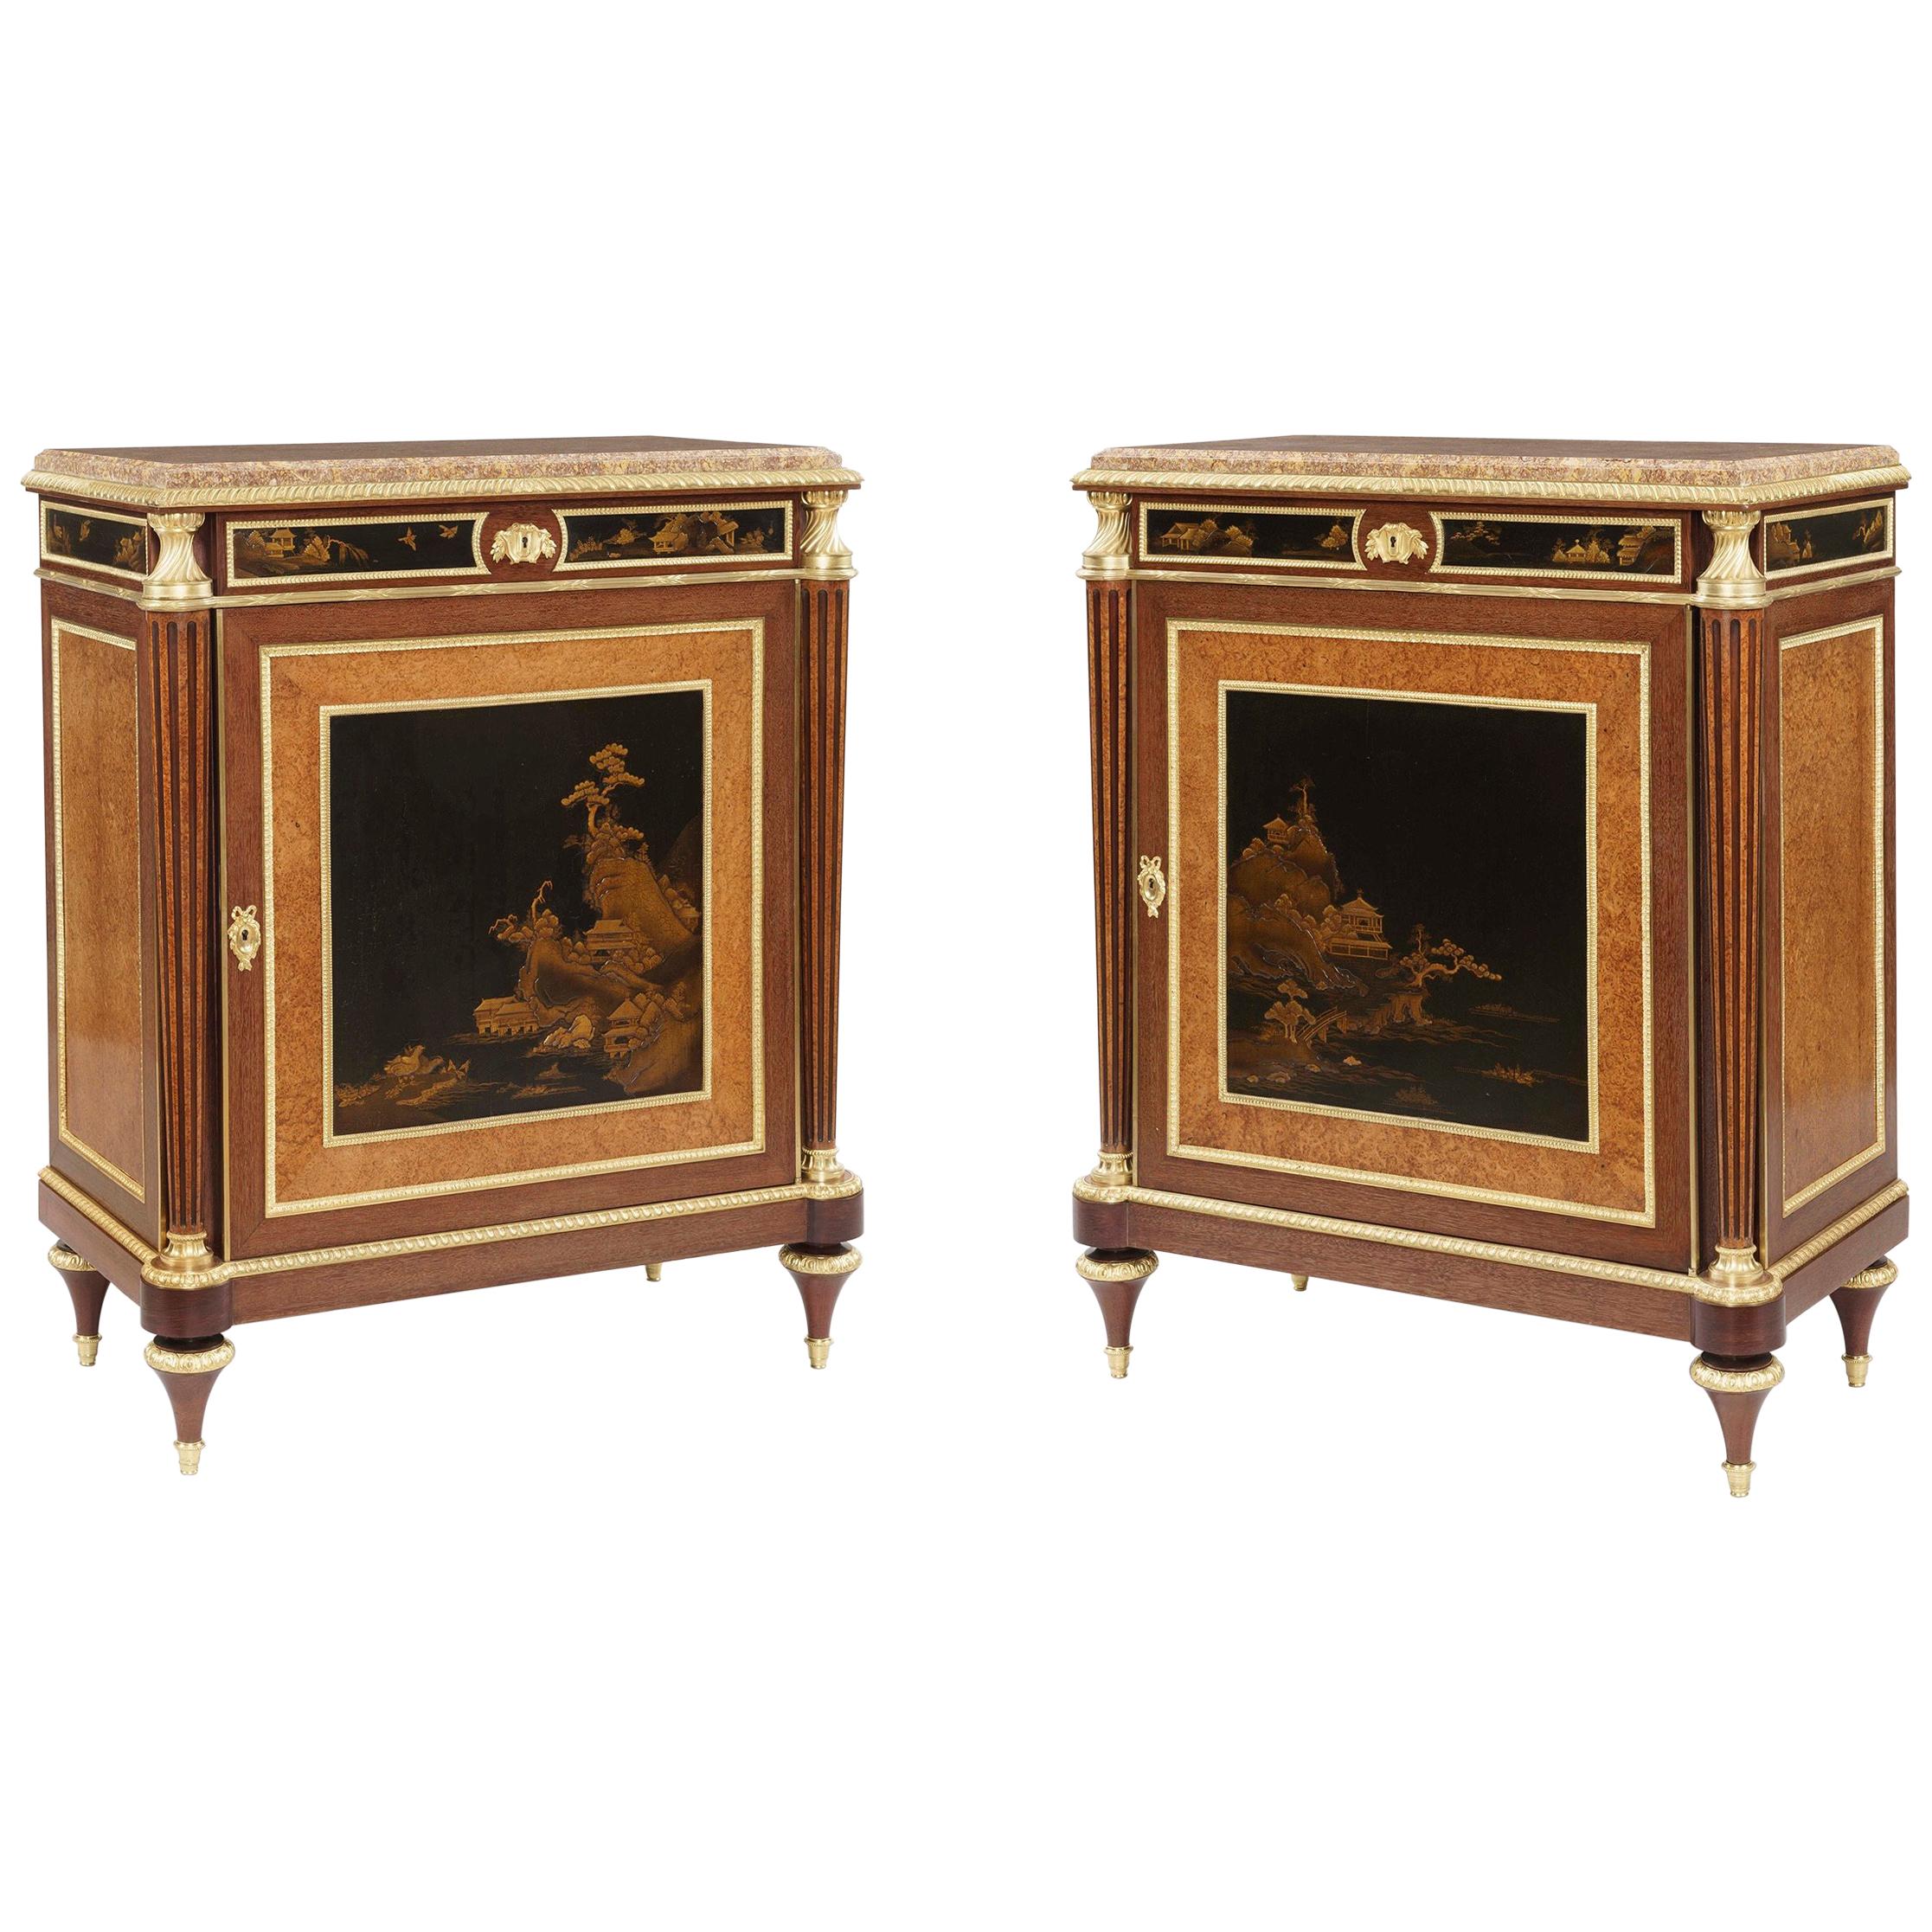 Unrivalled Pair of 19th Century Cabinets with Lacquer Panels For Sale